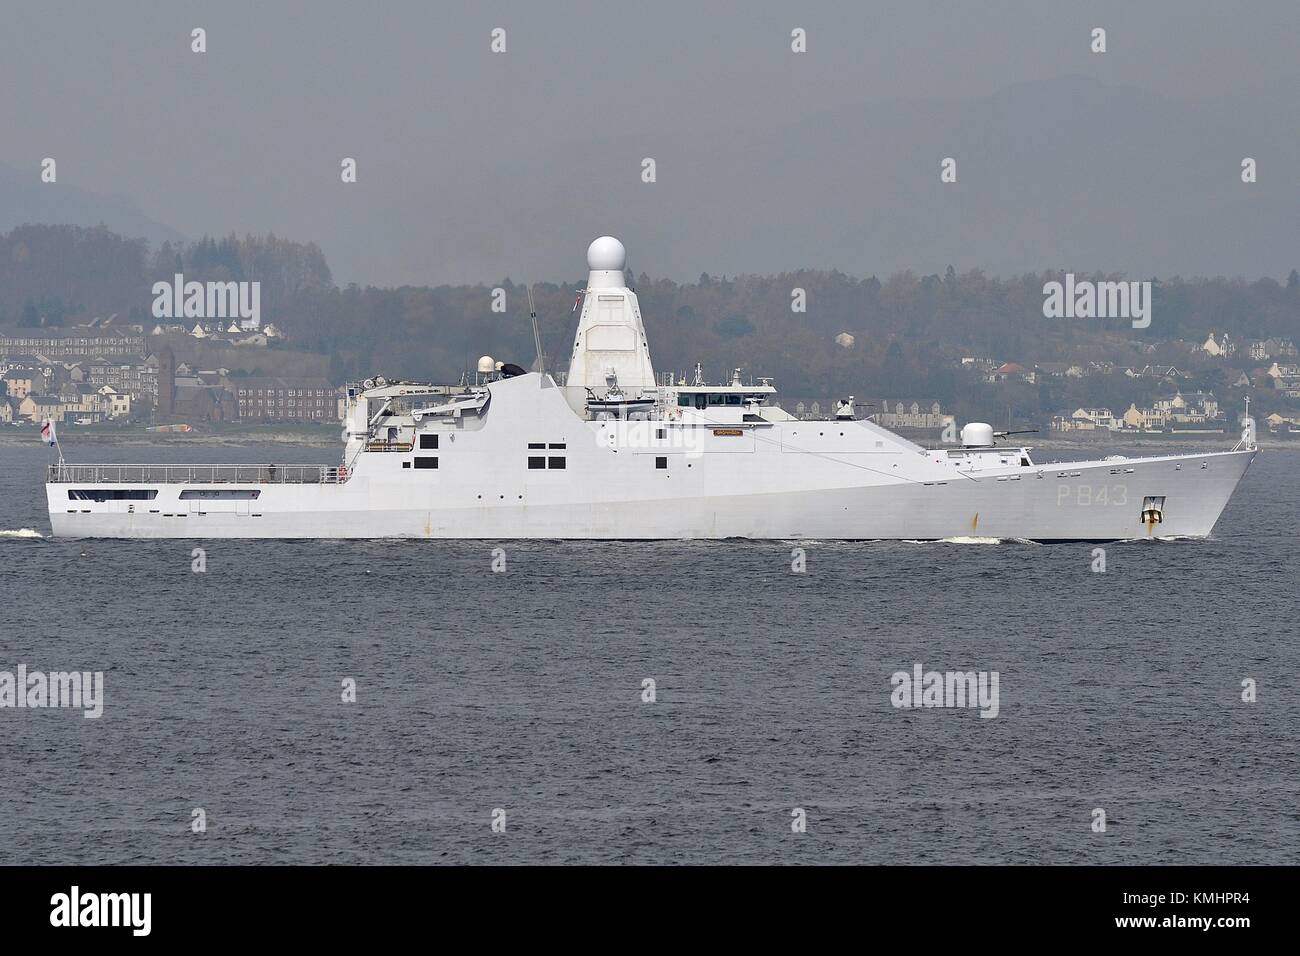 P843 HNLMS GRONINGEN IS A HOLLAND CLASS OFFSHORE PATROL VESSEL OF THE ROYAL NETHERLANDS NAVY. Stock Photo